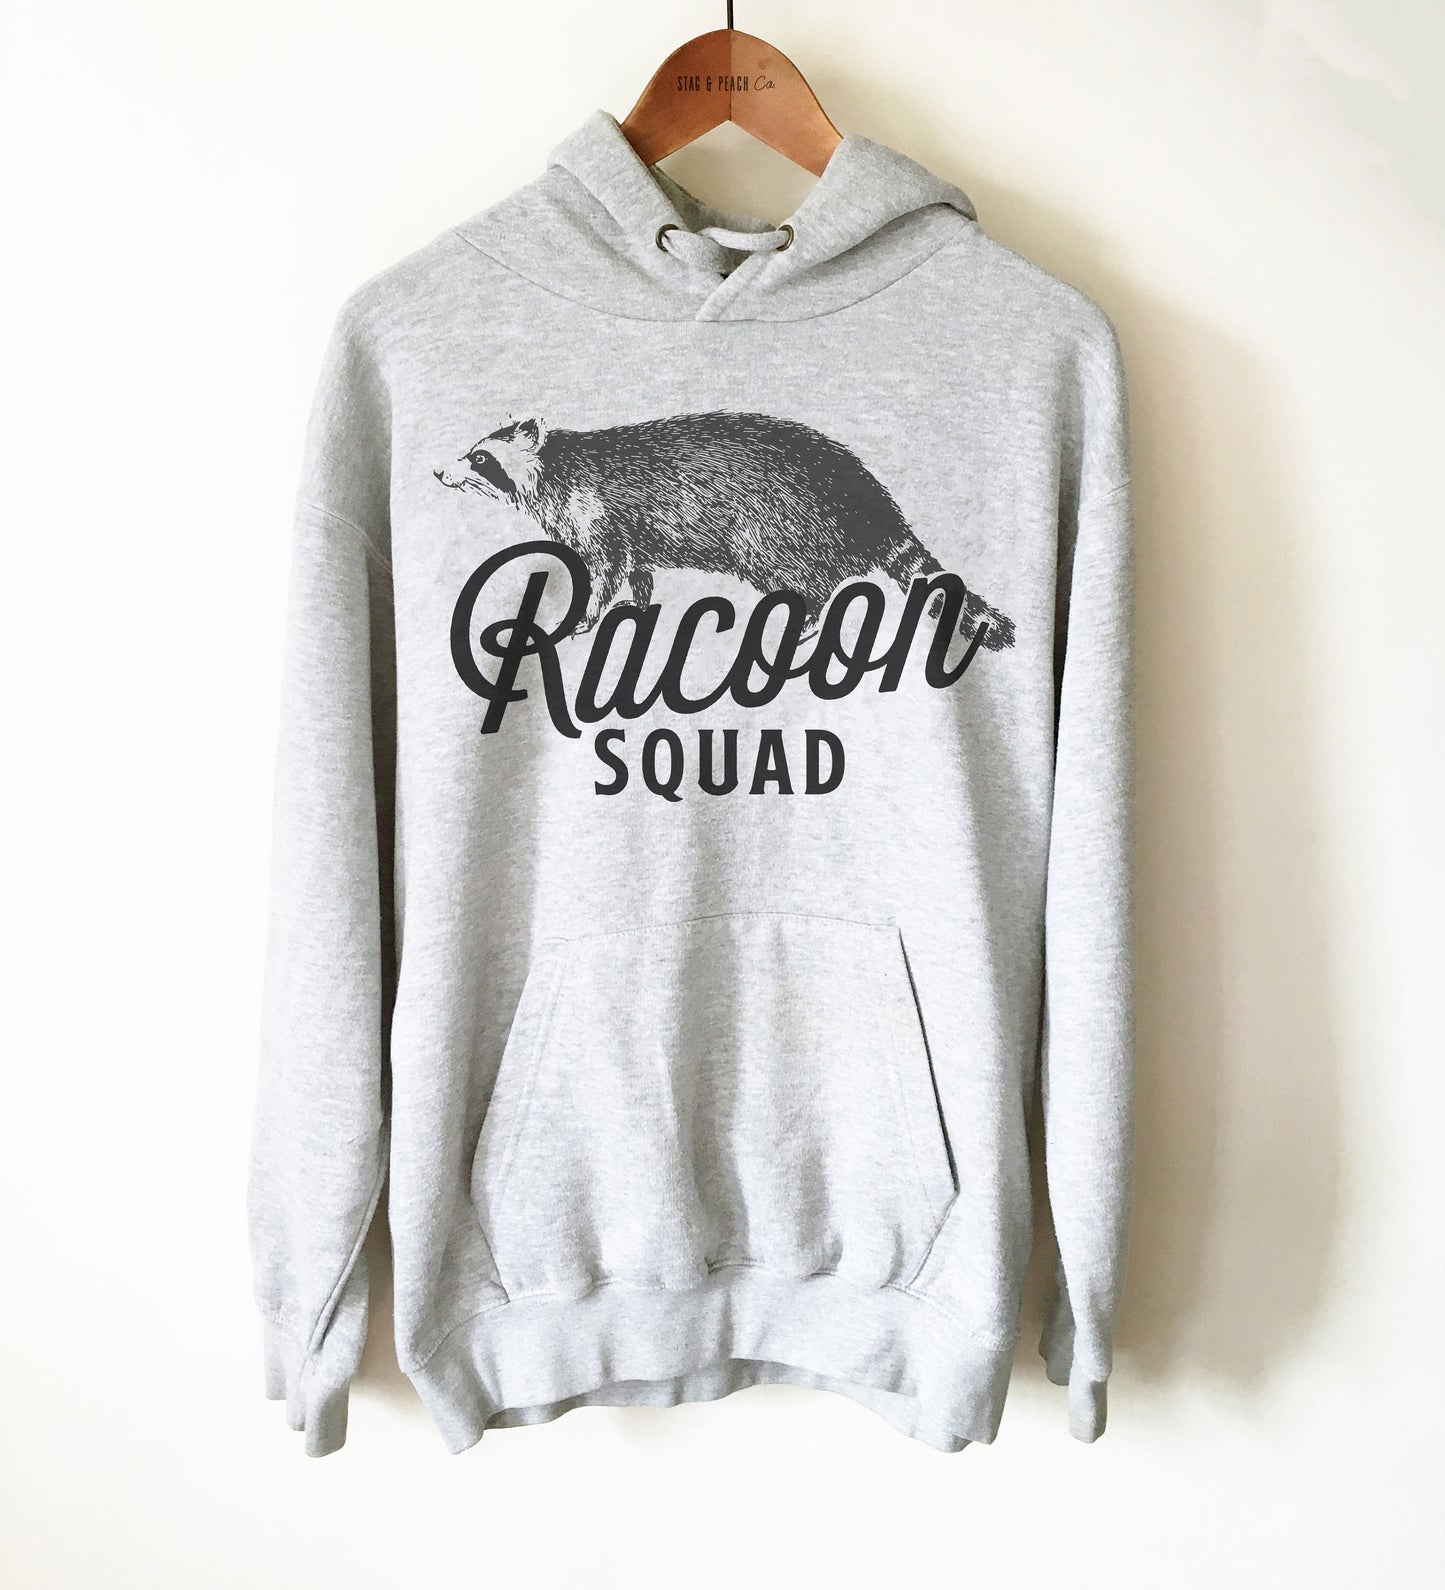 Raccoon Squad Unisex Hoodie - Gift For Raccoon Lover, Raccoon Owner Shirt, Quebec Shirt, Canada Shirt, Raccoon Rescue, Gift For Rescue Team